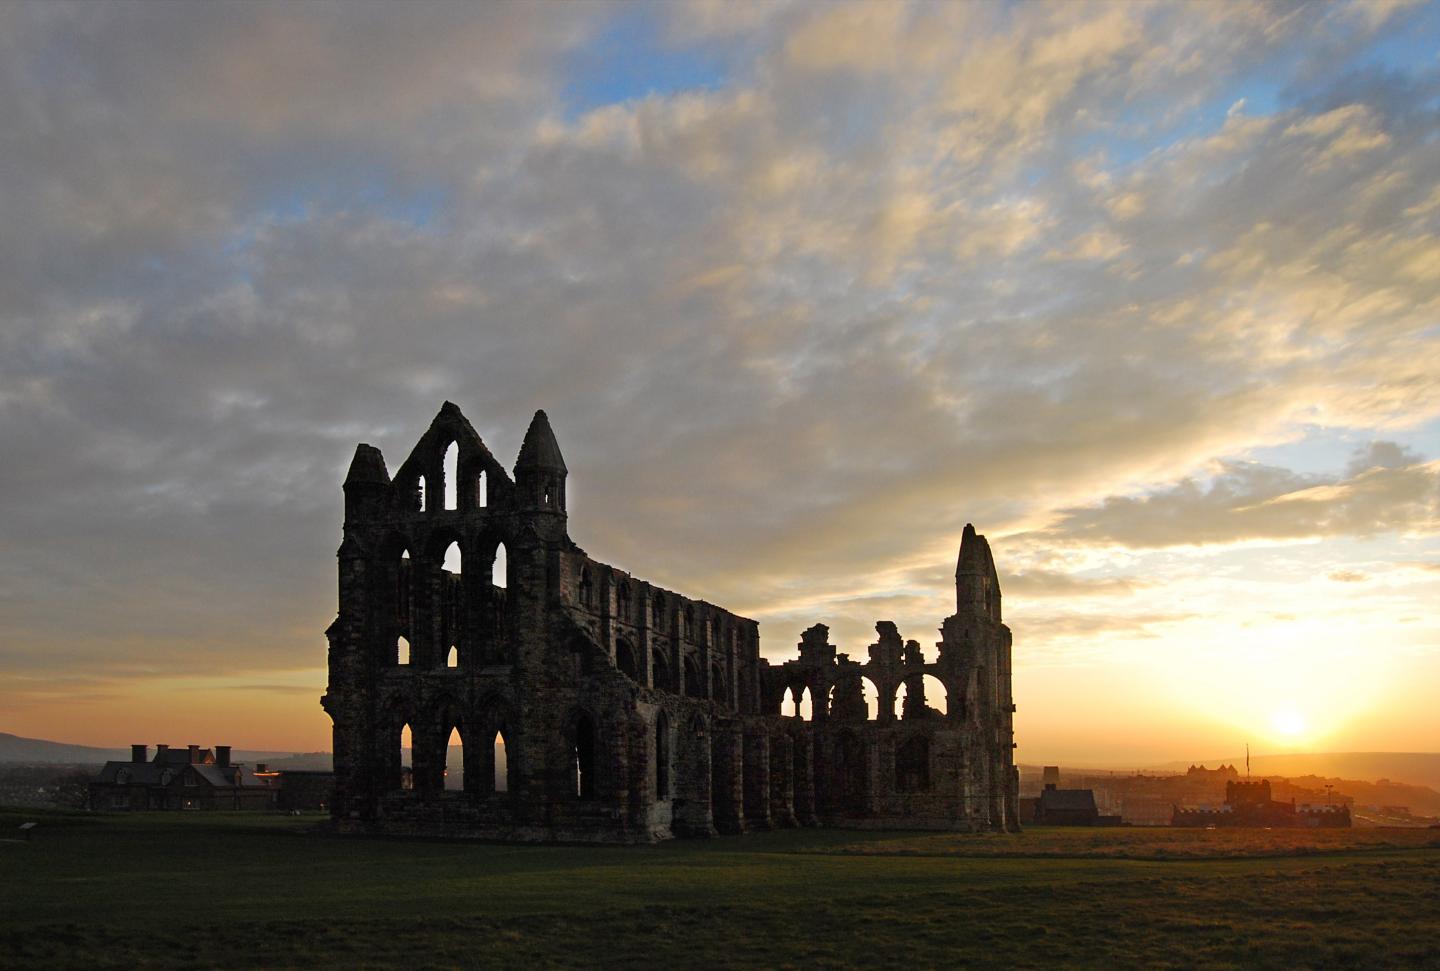 Whitby Abbey at sunset. Wikimedia commons